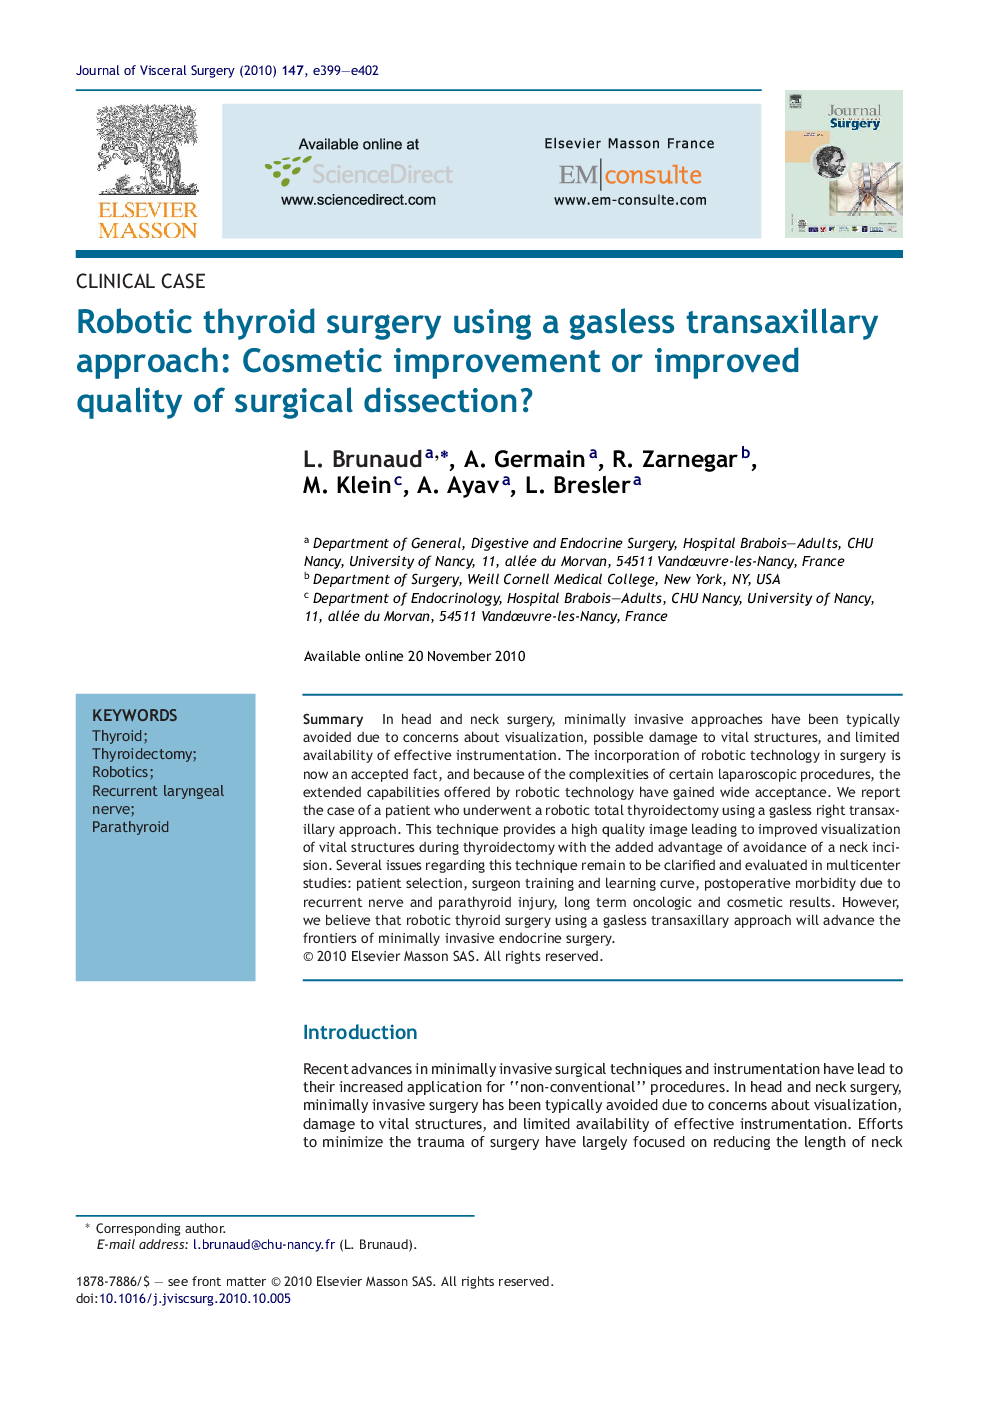 Robotic thyroid surgery using a gasless transaxillary approach: Cosmetic improvement or improved quality of surgical dissection?